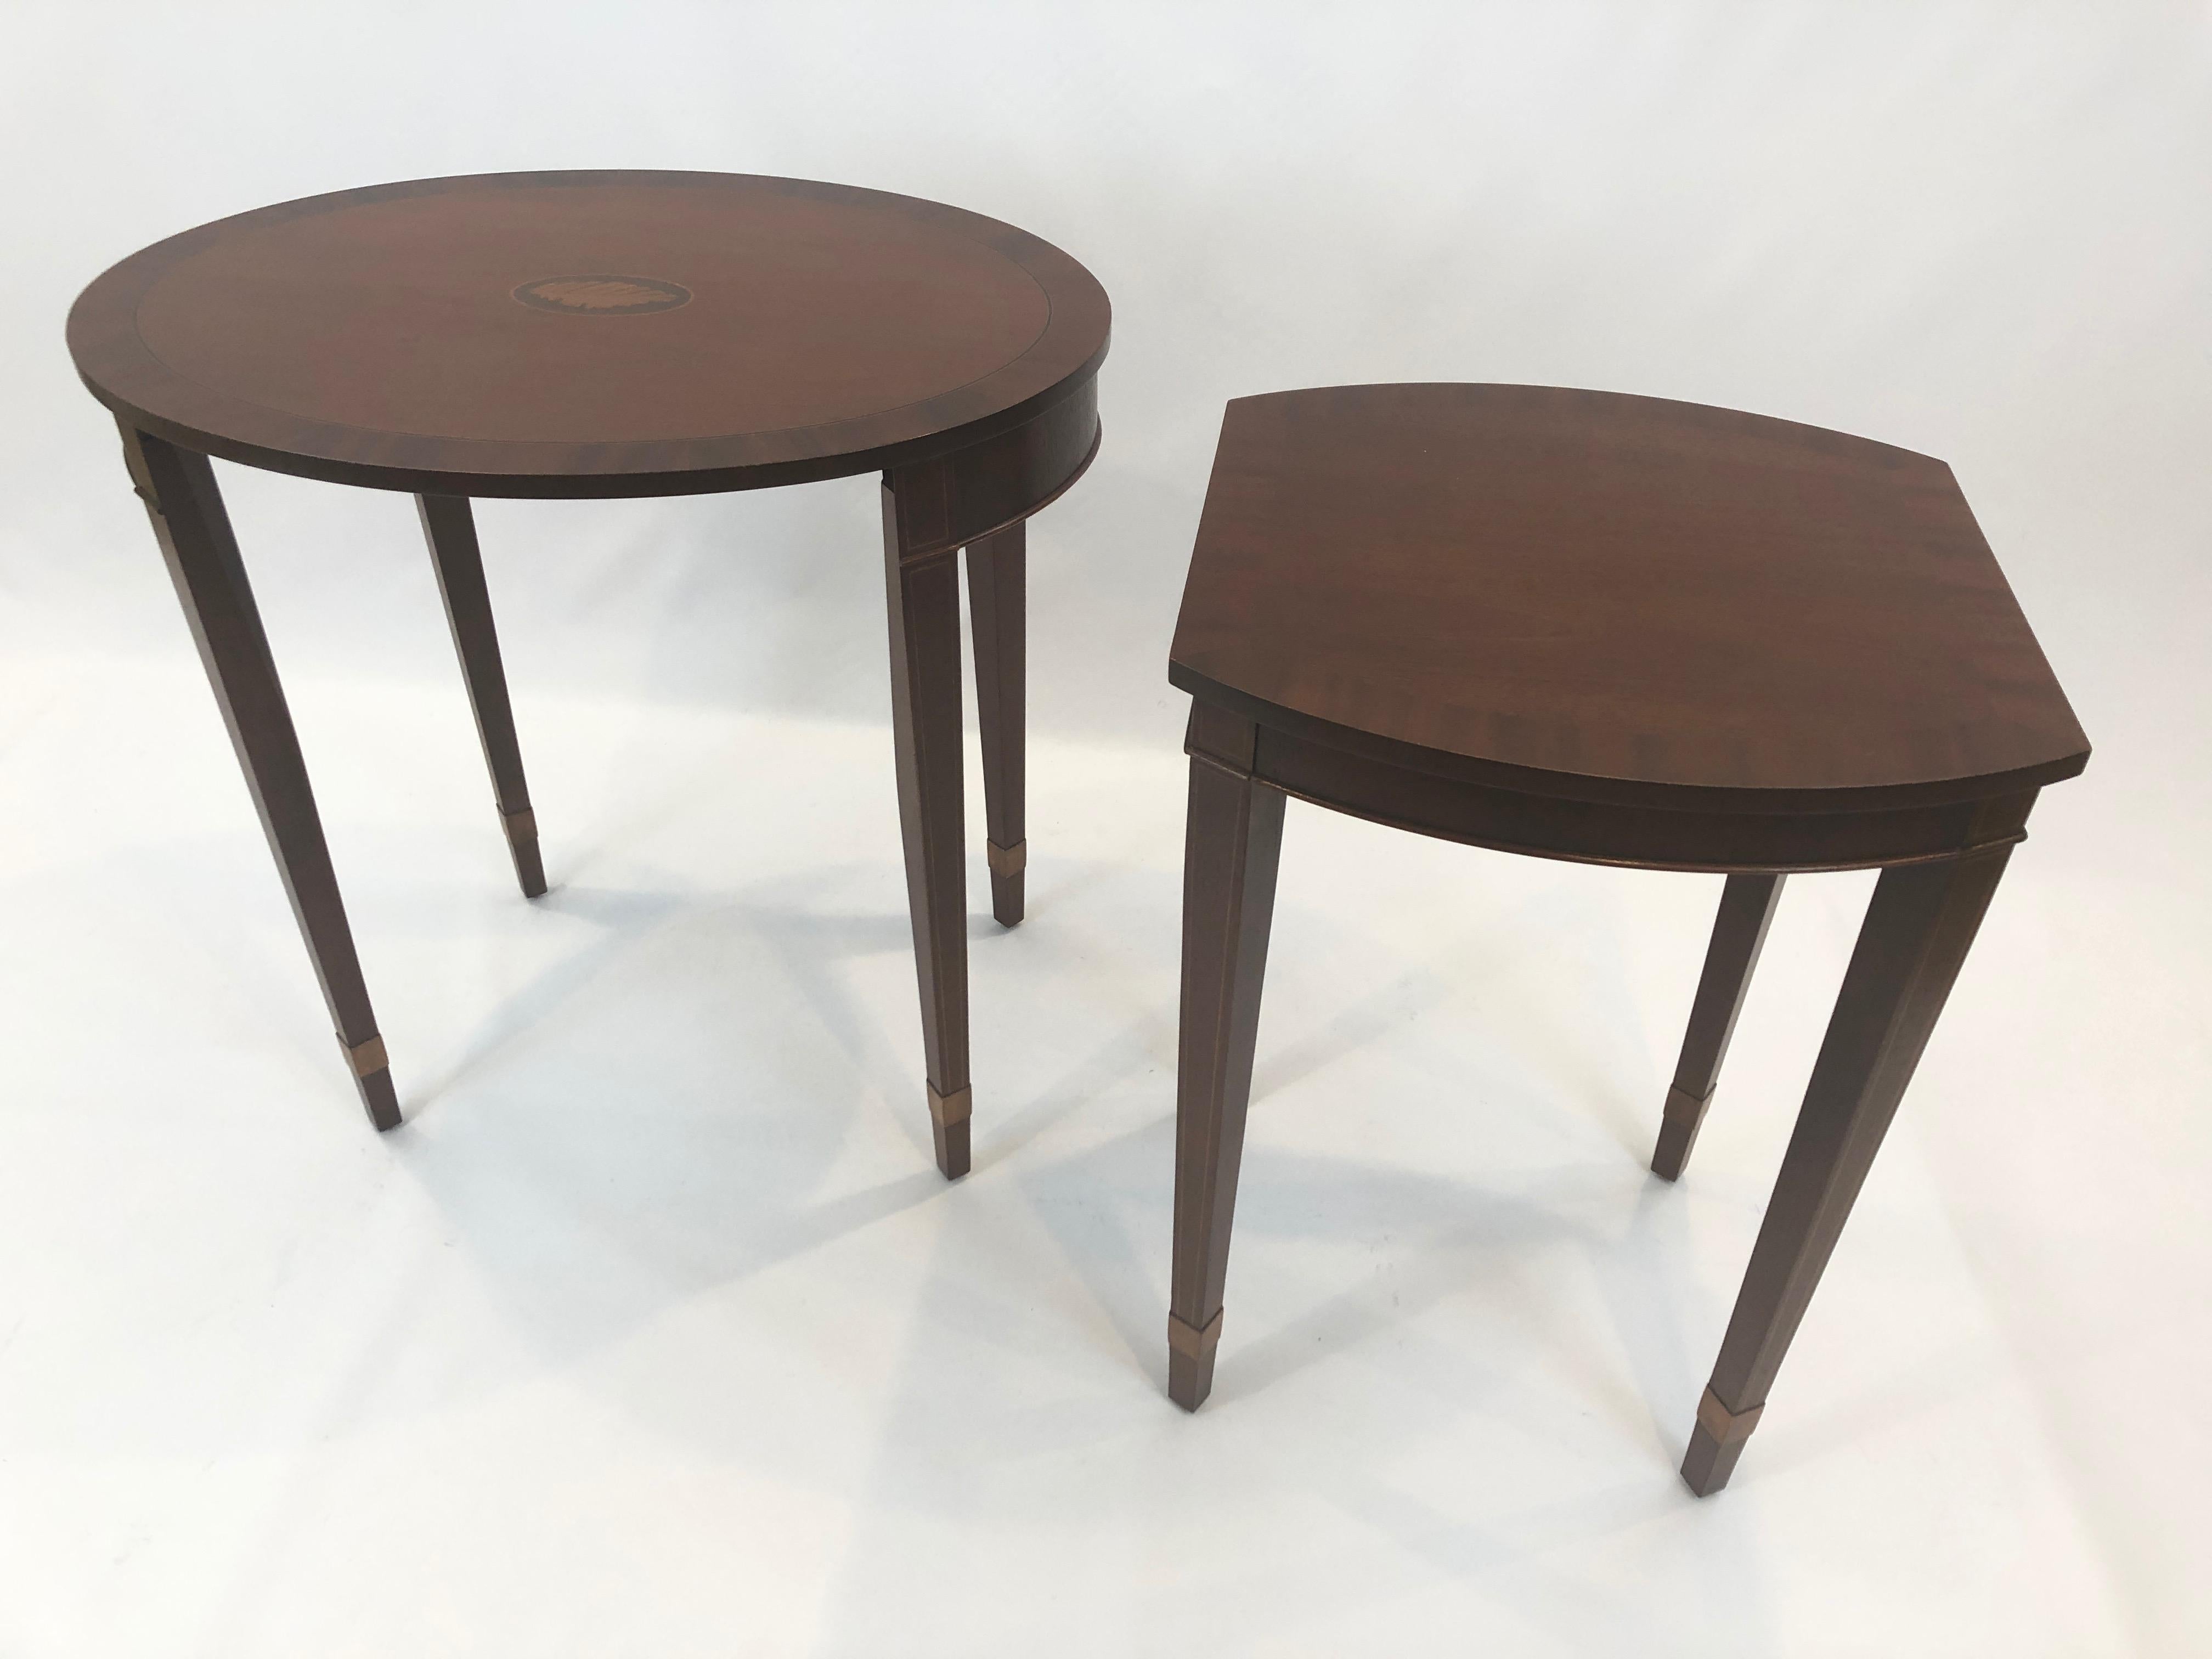 Late 20th Century Handsome Oval Mixed Wood Inlaid Nesting Tables by Baker For Sale